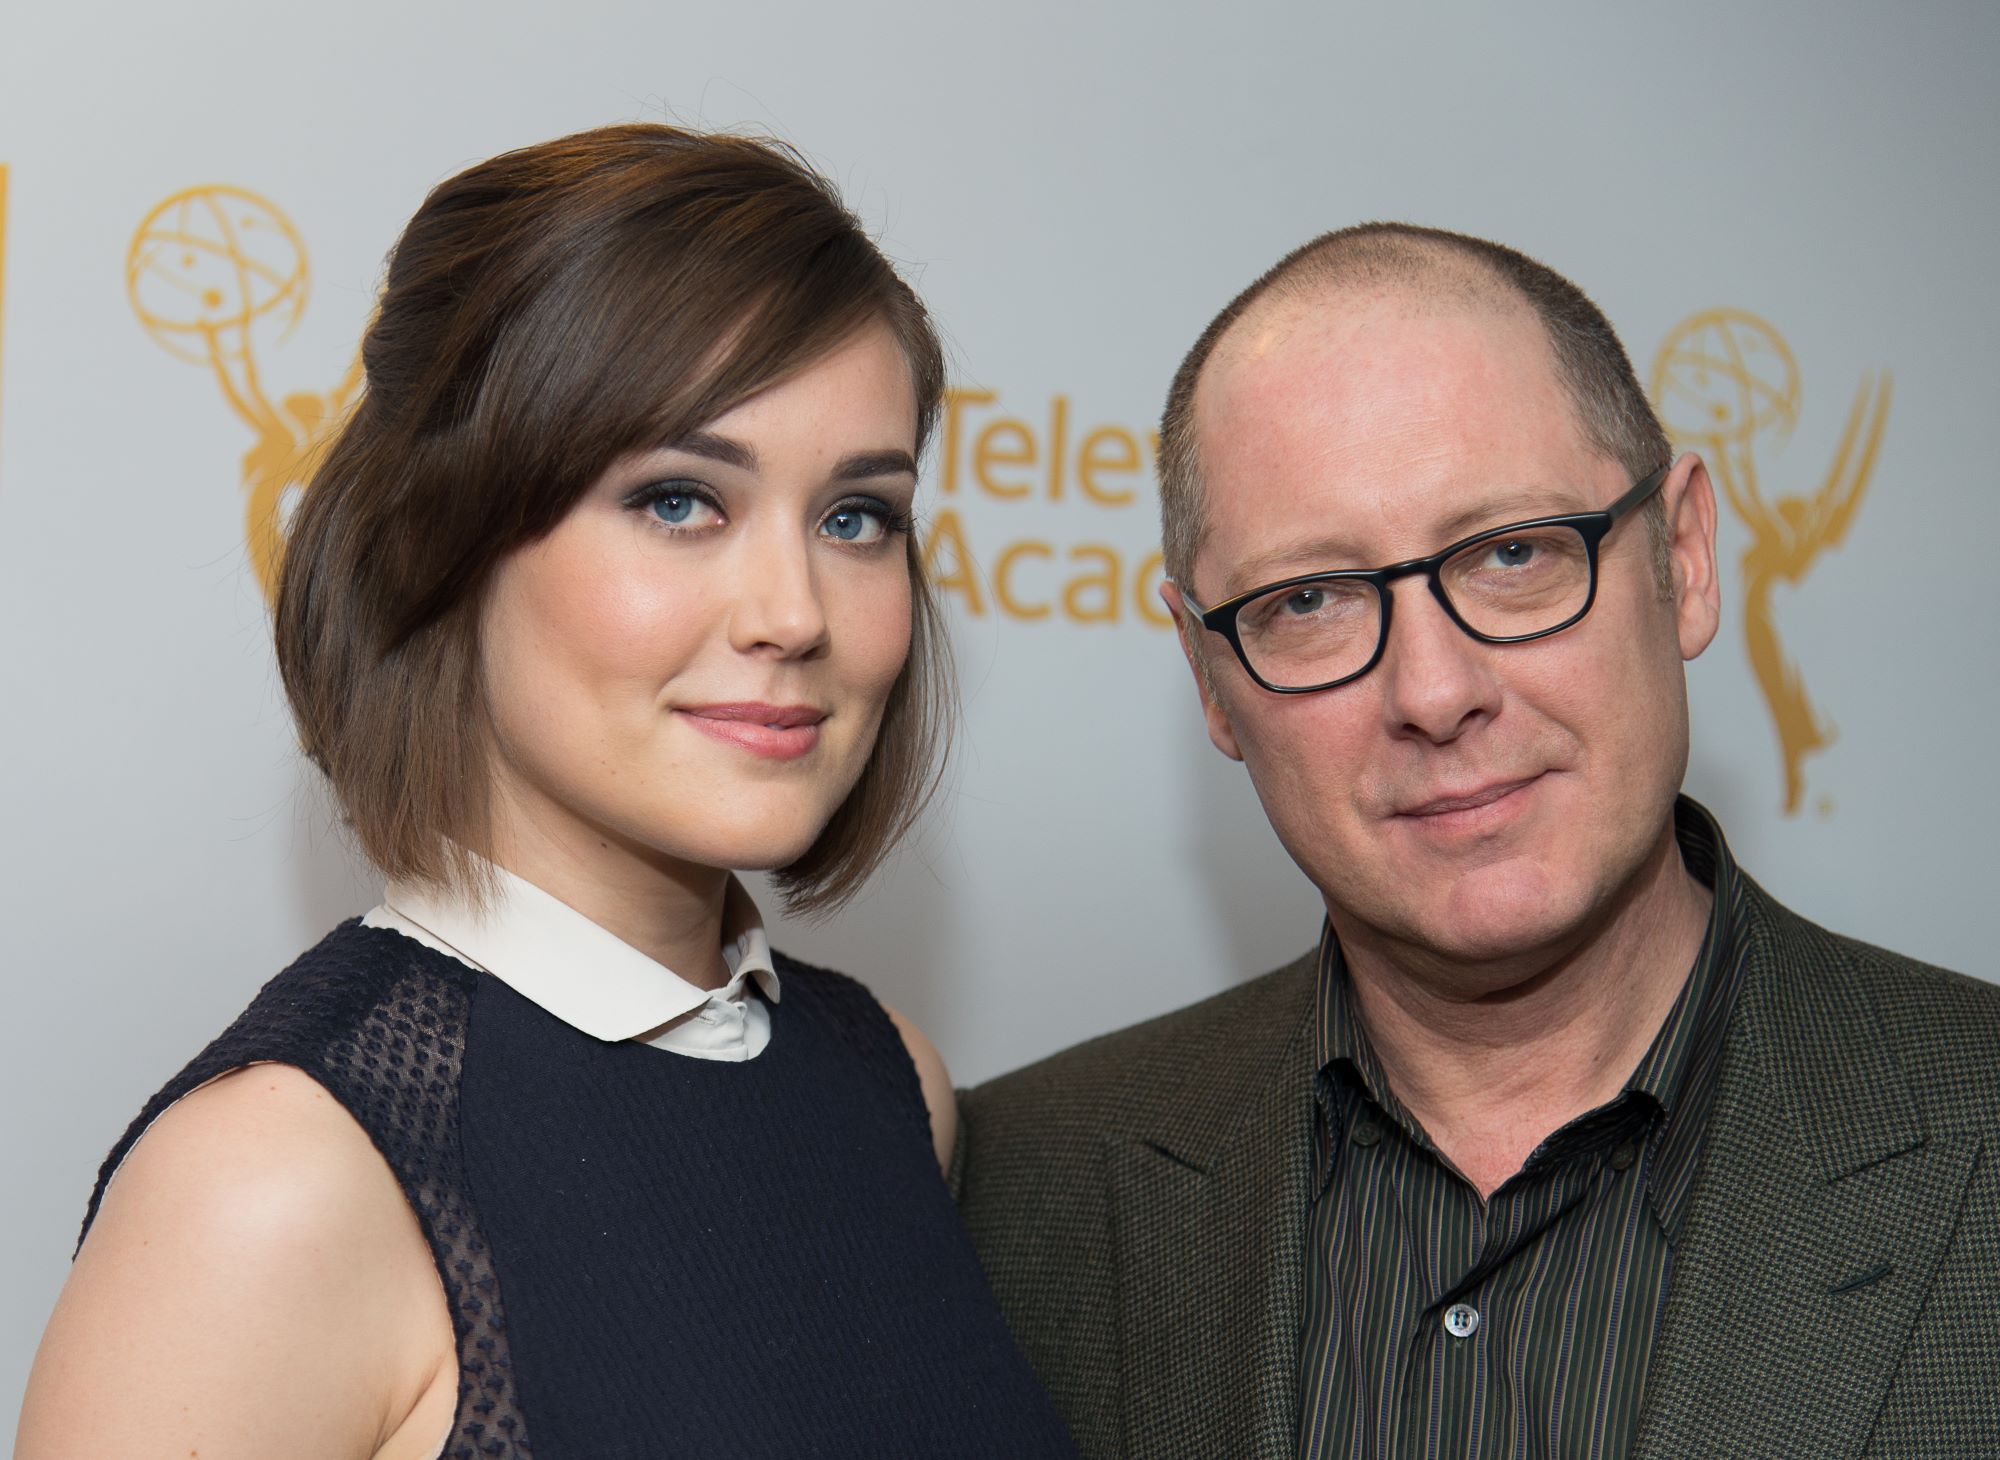 'The Blacklist' stars Megan Boone and James Spader pose together for a picture. Boone wears a blue dress with a white collar. Spader wears a grayish green suit jacket over a green and gray striped button-up shirt.